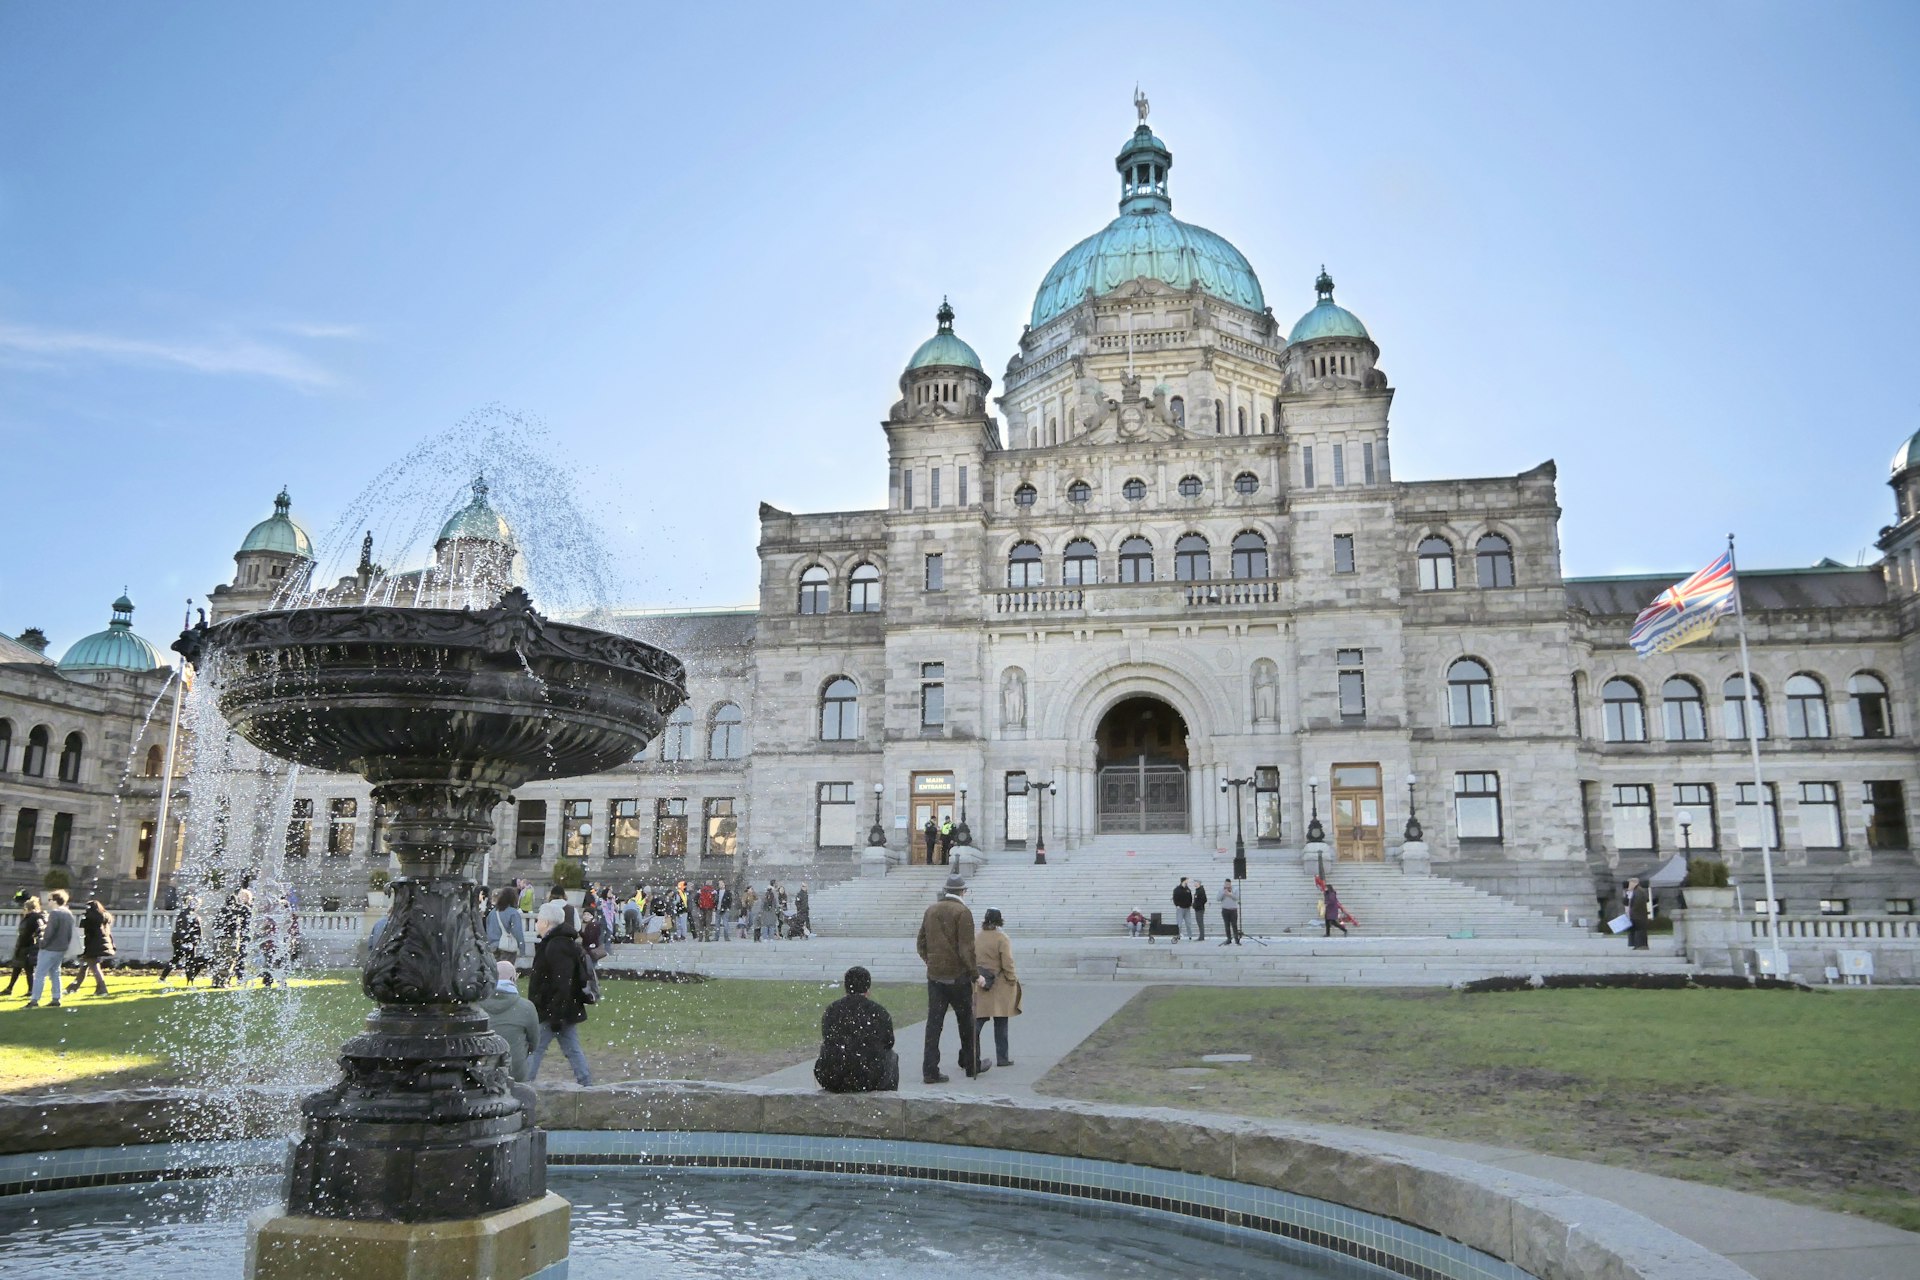 Mant people are milling around beside a fountain outside the Legislative Assembly Parliament Building of British Columbia in Victoria, on a sunny day.